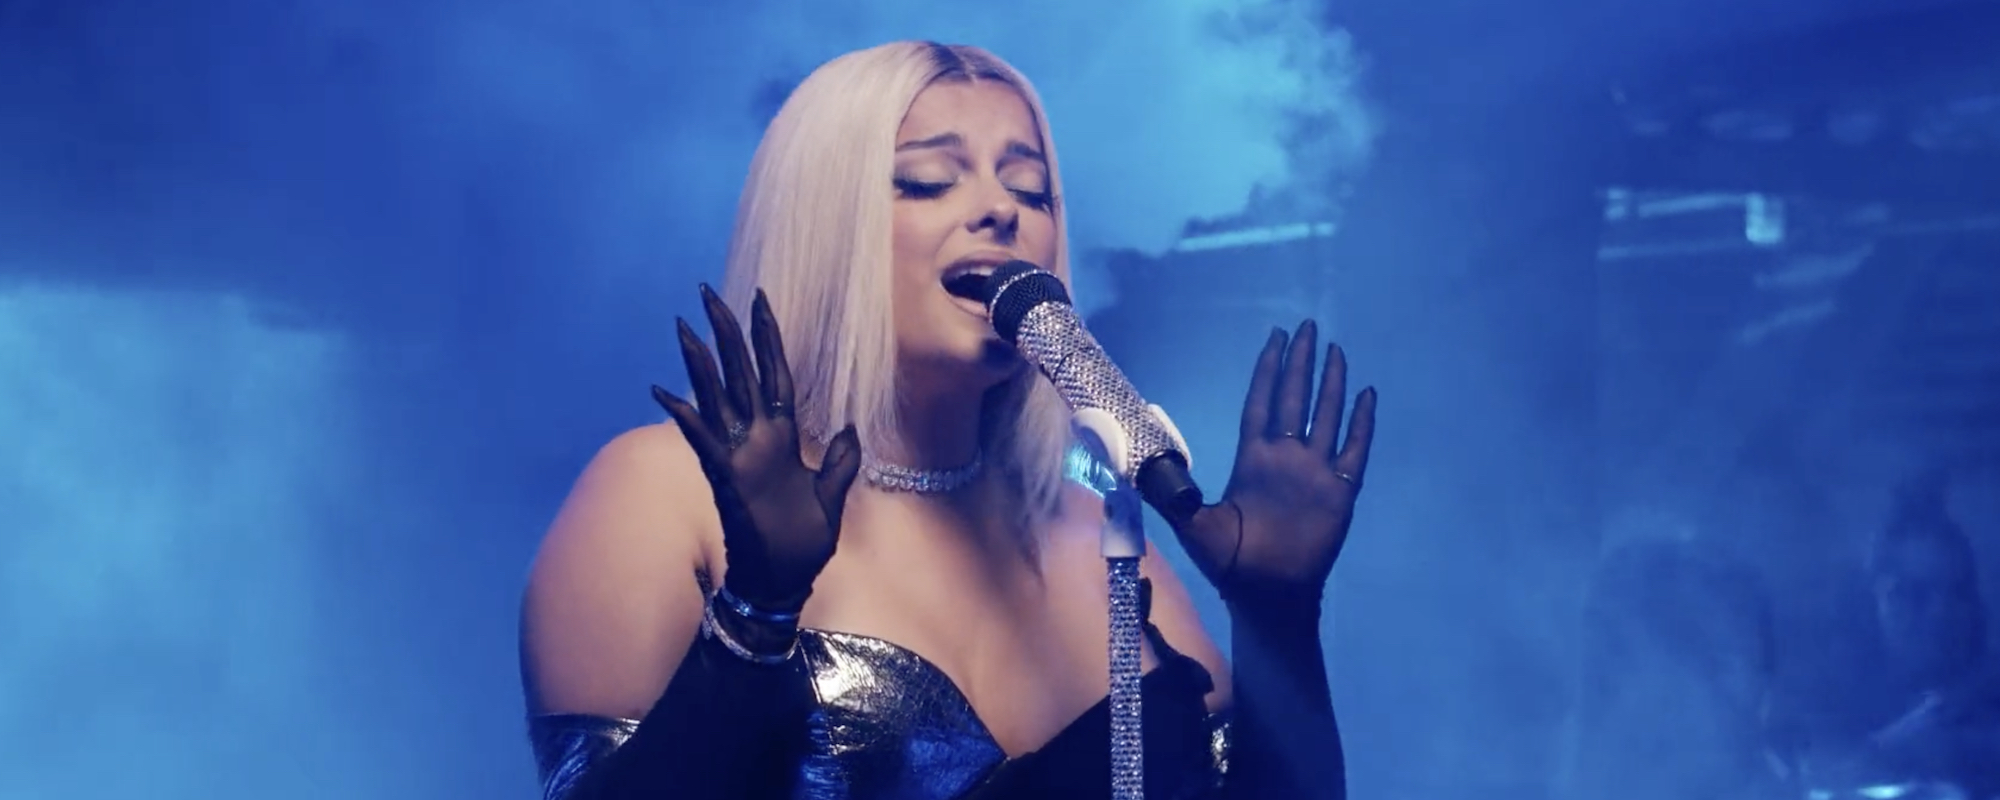 Bebe Rexha and David Guetta Light Up the 2023 Billboard Music Awards with “I’m Good” and “One In a Million”